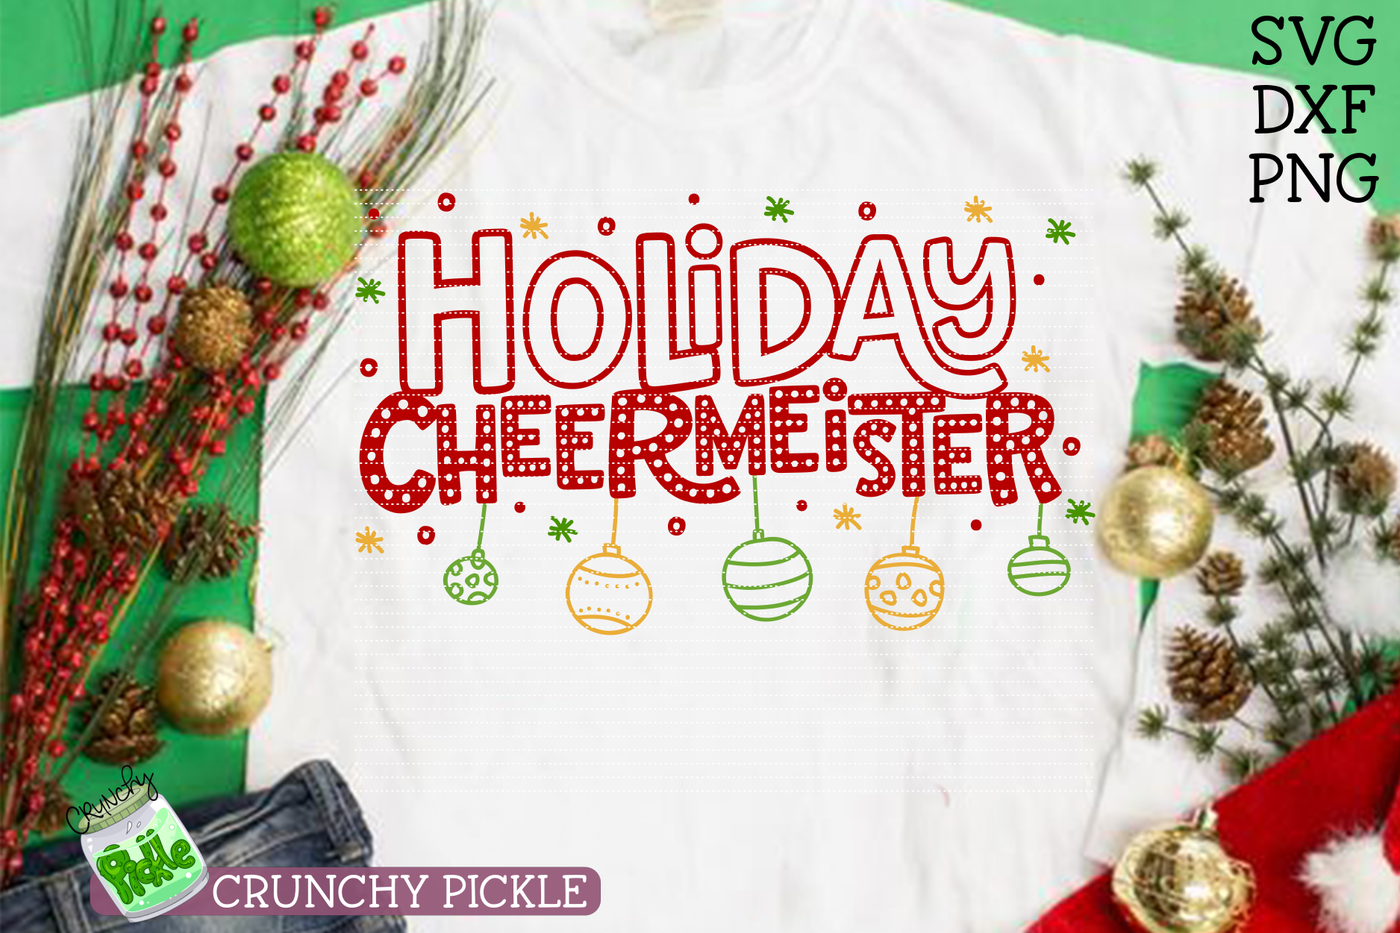 Holiday Cheermeister Christmas Svg By Crunchy Pickle Thehungryjpeg Com